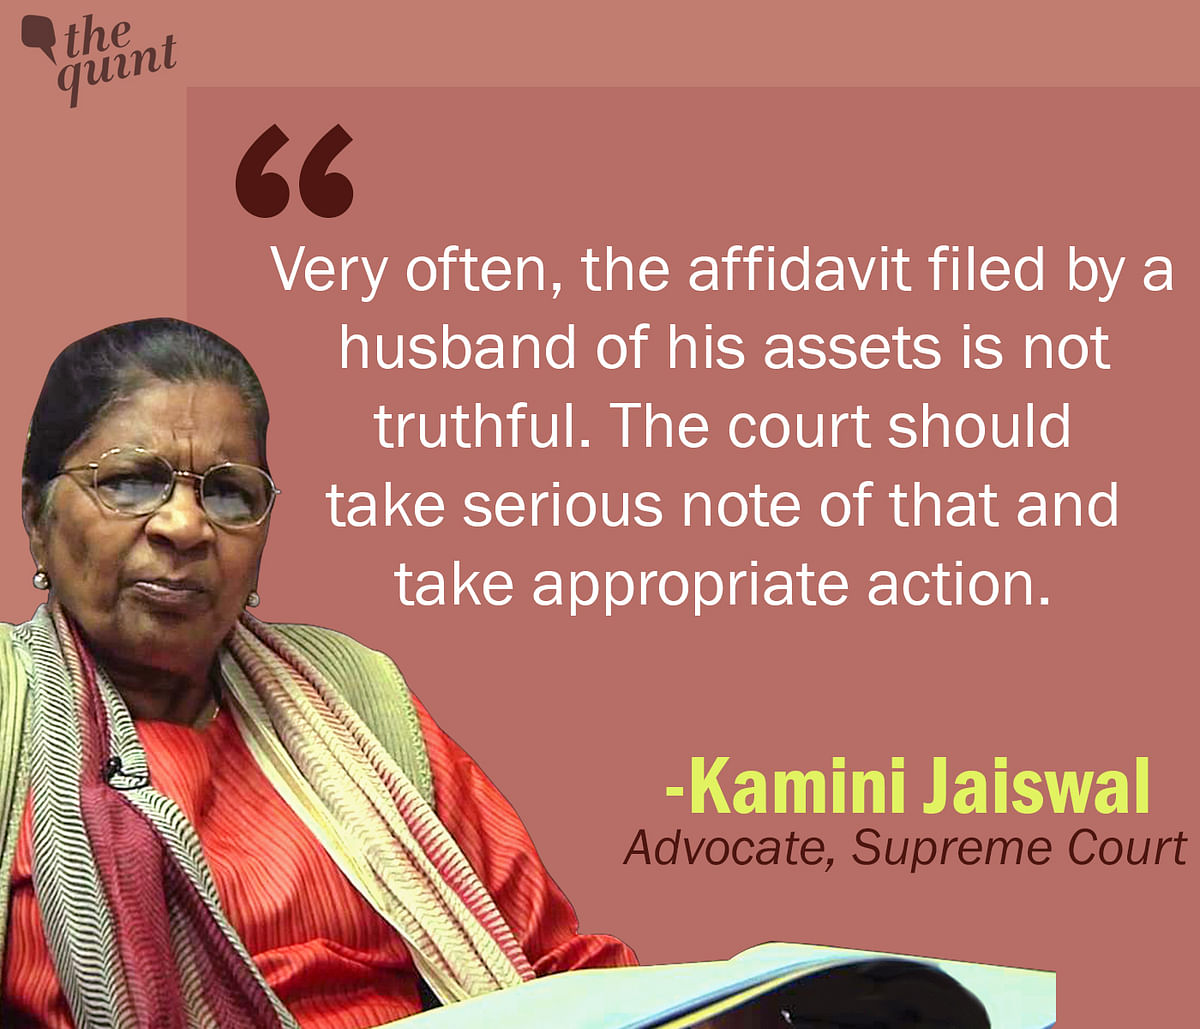 

We spoke to SC advocate Kamini Jaiswal on what the SC ruling means and here is what she had to say.